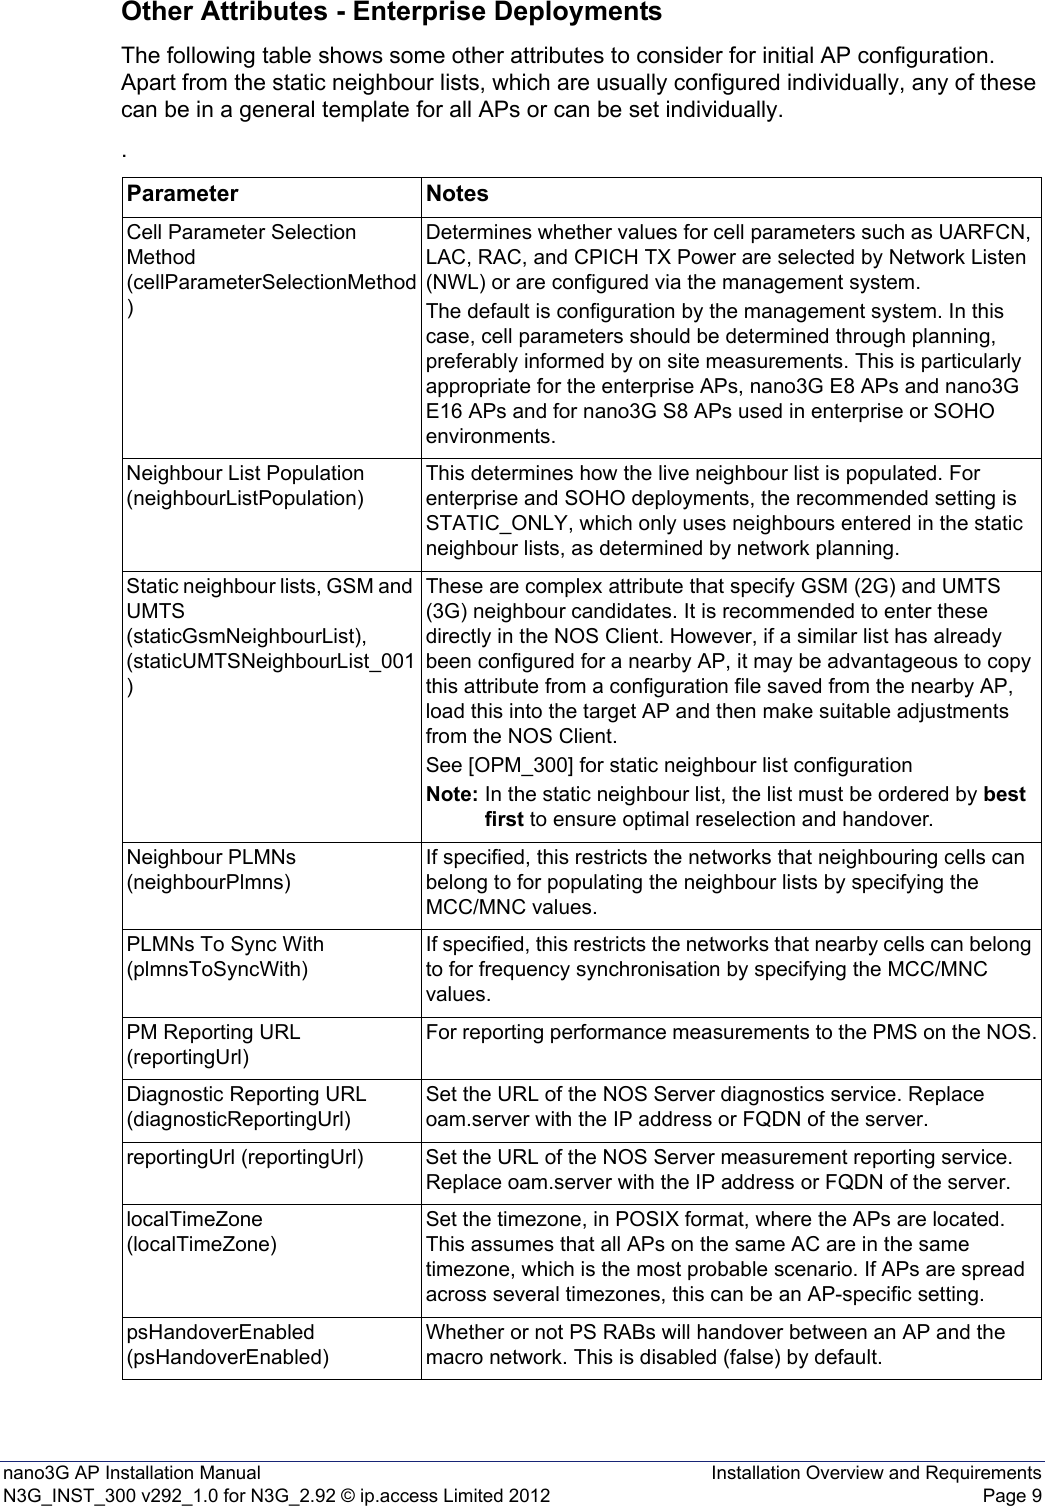 nano3G AP Installation Manual Installation Overview and RequirementsN3G_INST_300 v292_1.0 for N3G_2.92 © ip.access Limited 2012 Page 9Other Attributes - Enterprise DeploymentsThe following table shows some other attributes to consider for initial AP configuration. Apart from the static neighbour lists, which are usually configured individually, any of these can be in a general template for all APs or can be set individually..Parameter NotesCell Parameter Selection Method (cellParameterSelectionMethod)Determines whether values for cell parameters such as UARFCN, LAC, RAC, and CPICH TX Power are selected by Network Listen (NWL) or are configured via the management system.The default is configuration by the management system. In this case, cell parameters should be determined through planning, preferably informed by on site measurements. This is particularly appropriate for the enterprise APs, nano3G E8 APs and nano3G E16 APs and for nano3G S8 APs used in enterprise or SOHO environments. Neighbour List Population (neighbourListPopulation)This determines how the live neighbour list is populated. For enterprise and SOHO deployments, the recommended setting is STATIC_ONLY, which only uses neighbours entered in the static neighbour lists, as determined by network planning. Static neighbour lists, GSM and UMTS (staticGsmNeighbourList), (staticUMTSNeighbourList_001)These are complex attribute that specify GSM (2G) and UMTS (3G) neighbour candidates. It is recommended to enter these directly in the NOS Client. However, if a similar list has already been configured for a nearby AP, it may be advantageous to copy this attribute from a configuration file saved from the nearby AP, load this into the target AP and then make suitable adjustments from the NOS Client.See [OPM_300] for static neighbour list configurationNote: In the static neighbour list, the list must be ordered by best first to ensure optimal reselection and handover.Neighbour PLMNs (neighbourPlmns)If specified, this restricts the networks that neighbouring cells can belong to for populating the neighbour lists by specifying the MCC/MNC values.PLMNs To Sync With (plmnsToSyncWith)If specified, this restricts the networks that nearby cells can belong to for frequency synchronisation by specifying the MCC/MNC values.PM Reporting URL (reportingUrl)For reporting performance measurements to the PMS on the NOS.Diagnostic Reporting URL (diagnosticReportingUrl)Set the URL of the NOS Server diagnostics service. Replace oam.server with the IP address or FQDN of the server.reportingUrl (reportingUrl) Set the URL of the NOS Server measurement reporting service. Replace oam.server with the IP address or FQDN of the server.localTimeZone (localTimeZone)Set the timezone, in POSIX format, where the APs are located. This assumes that all APs on the same AC are in the same timezone, which is the most probable scenario. If APs are spread across several timezones, this can be an AP-specific setting. psHandoverEnabled (psHandoverEnabled)Whether or not PS RABs will handover between an AP and the macro network. This is disabled (false) by default. 